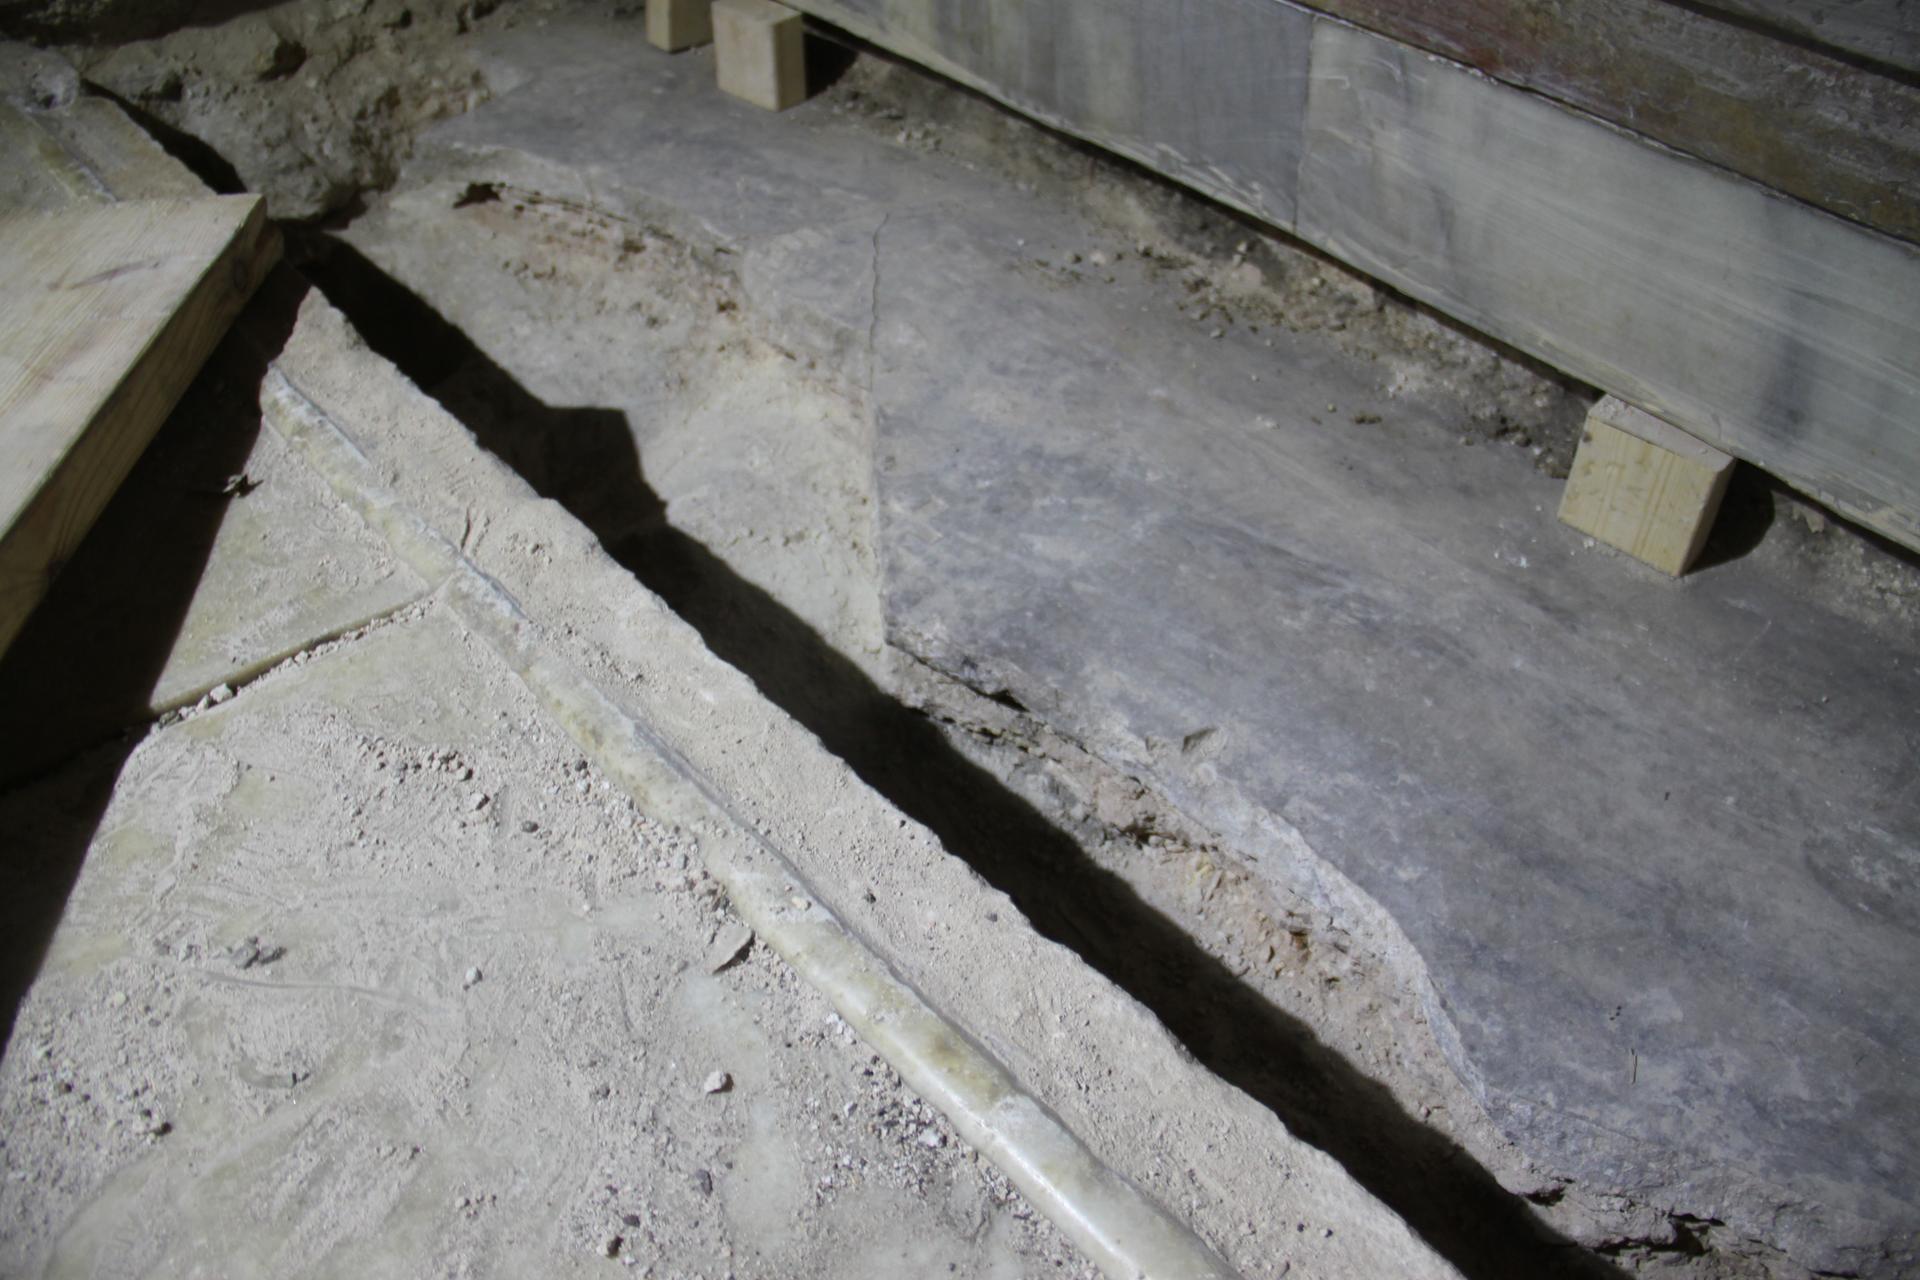 The marble lid (on the left) was pulled off, revealing a partly broken gray slab of marble. Under that is the debris-covered limestone layer where Jesus; body was said to have been placed after he was crucified.